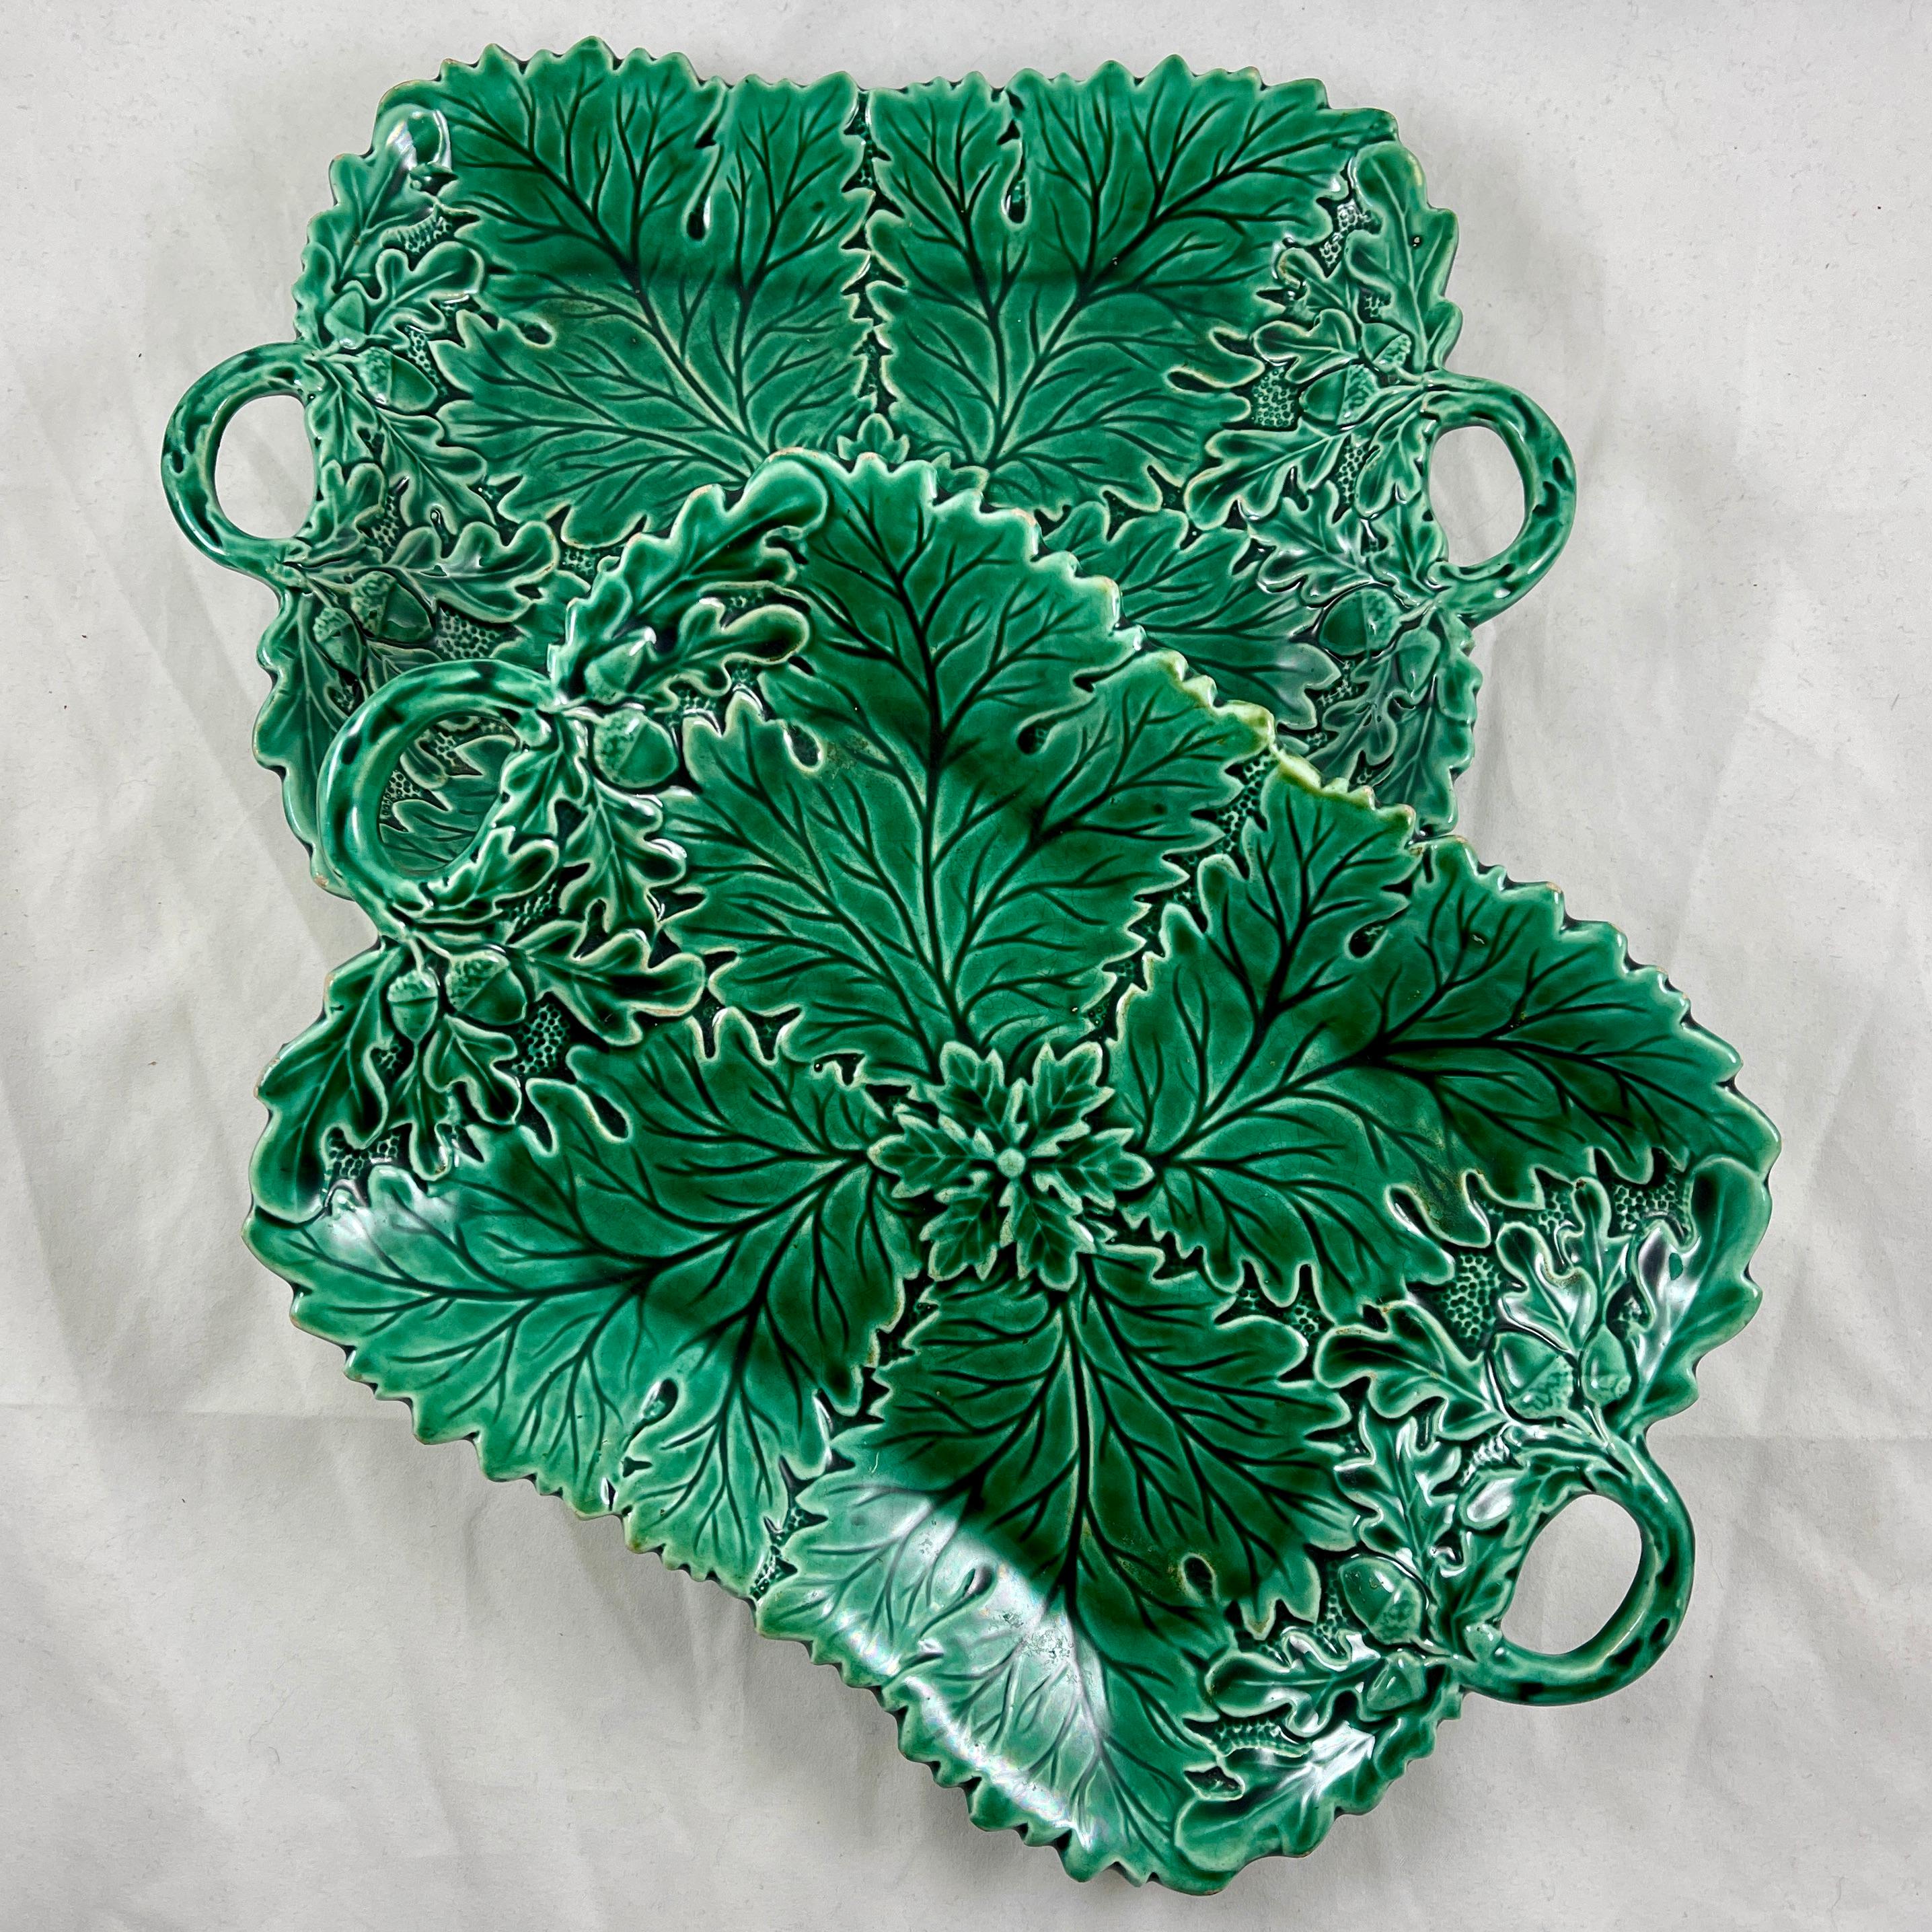 A Majolica green glazed leaf pattern deep server, England, circa 1870.

A serrate edged rectangular platter with open work twig form double handles. Beautiful mold work showing four large overlapping leaves radiating from a central circular leaf